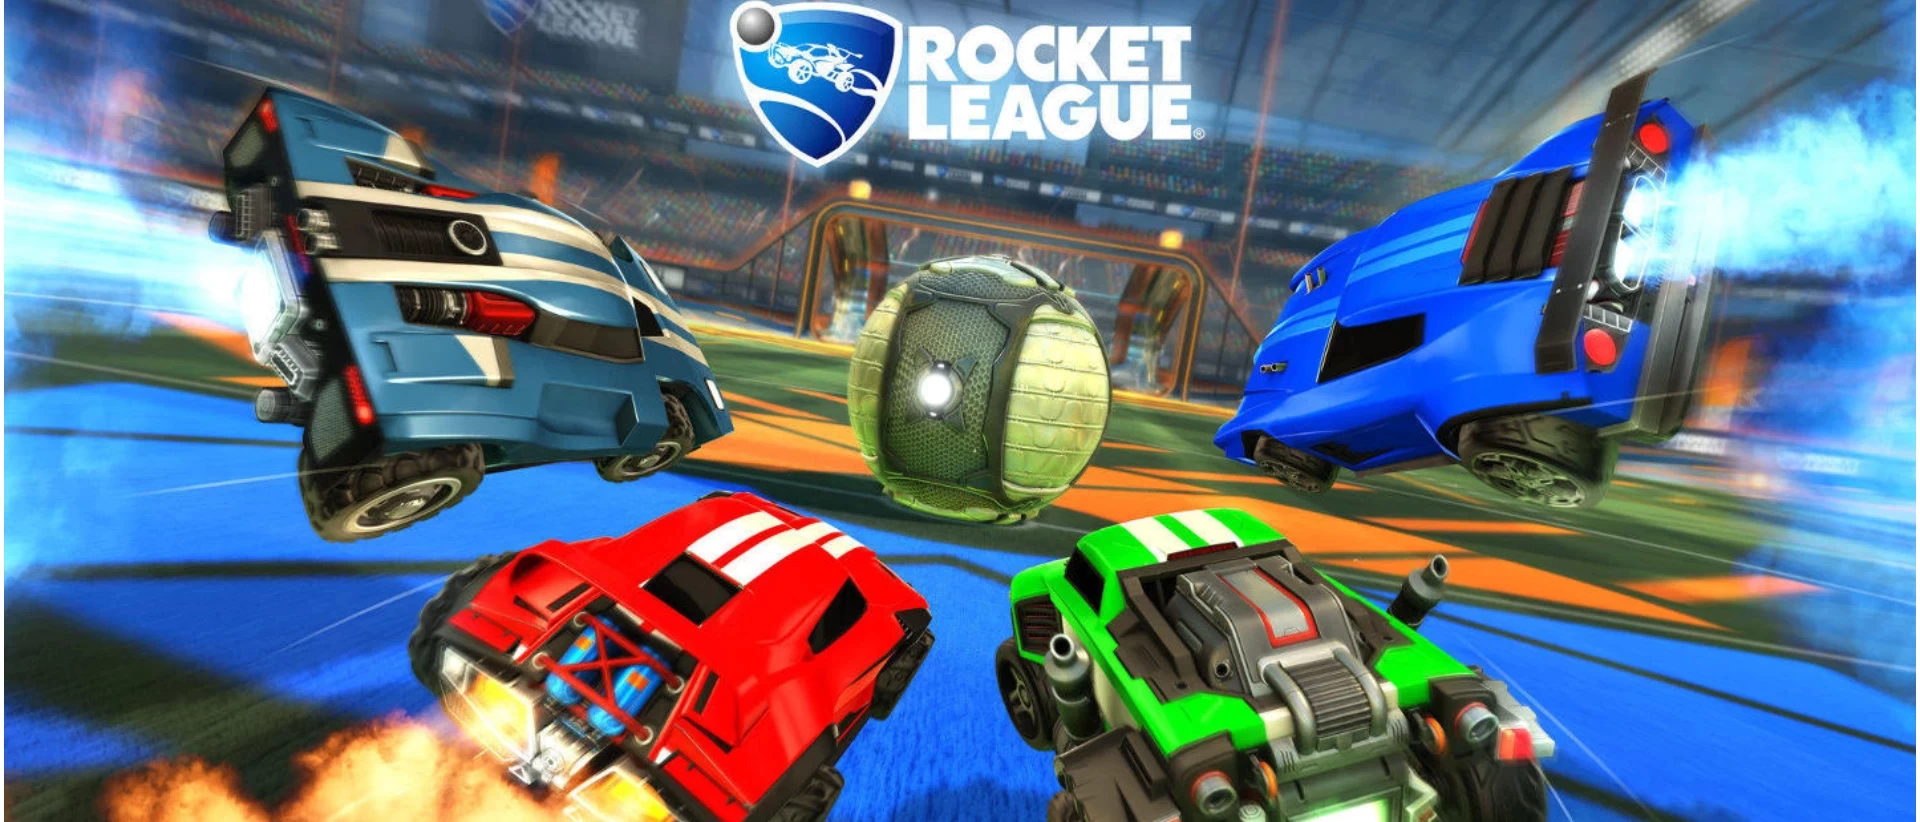 The making of Rocket League